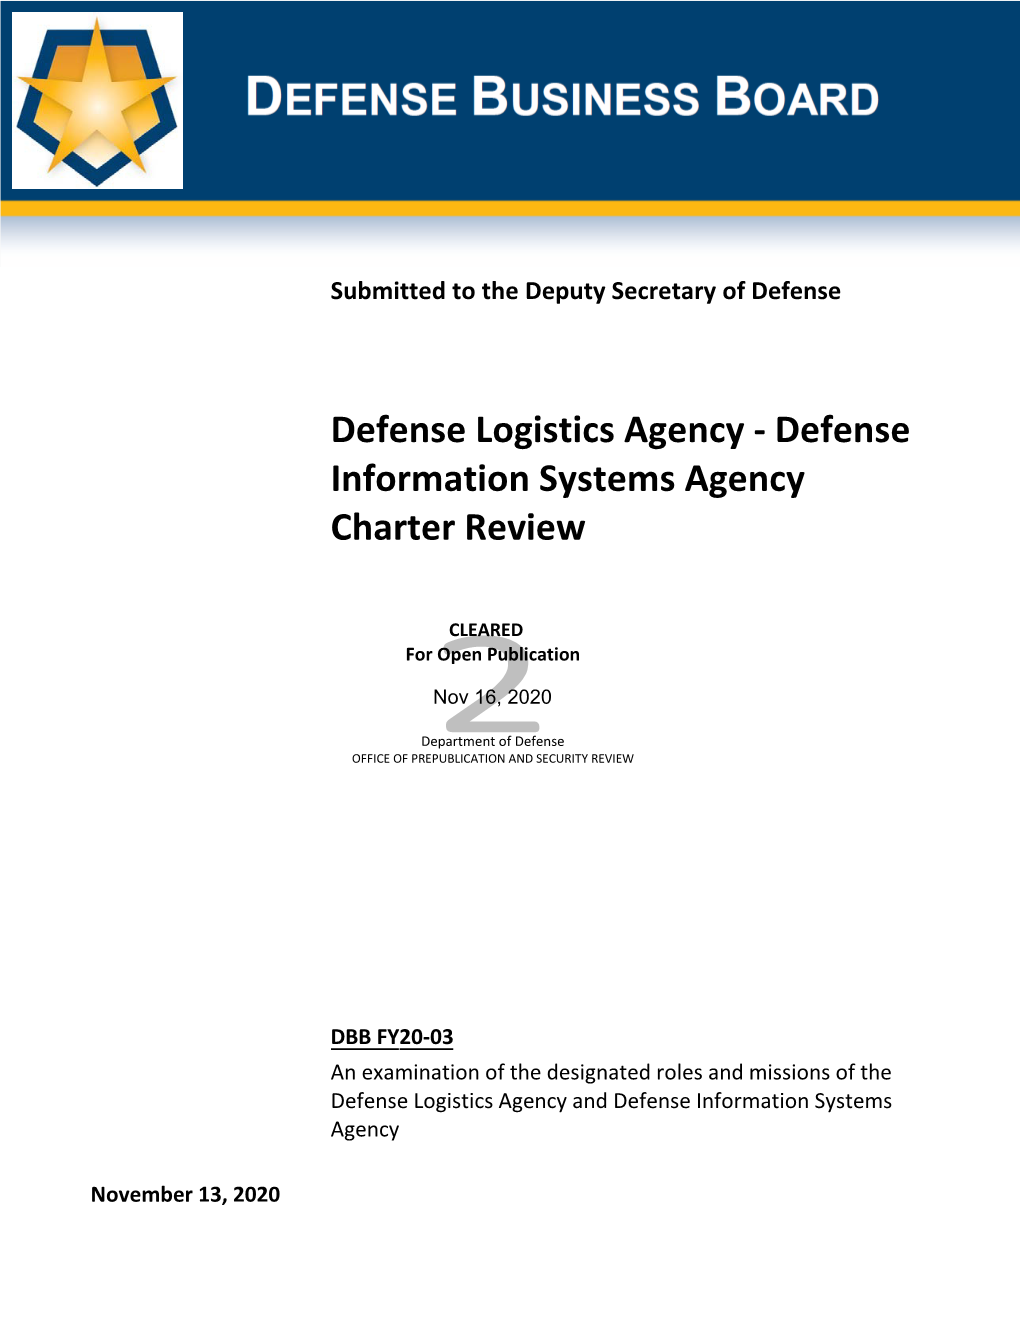 Defense Logistics Agency - Defense Information Systems Agency Charter Review